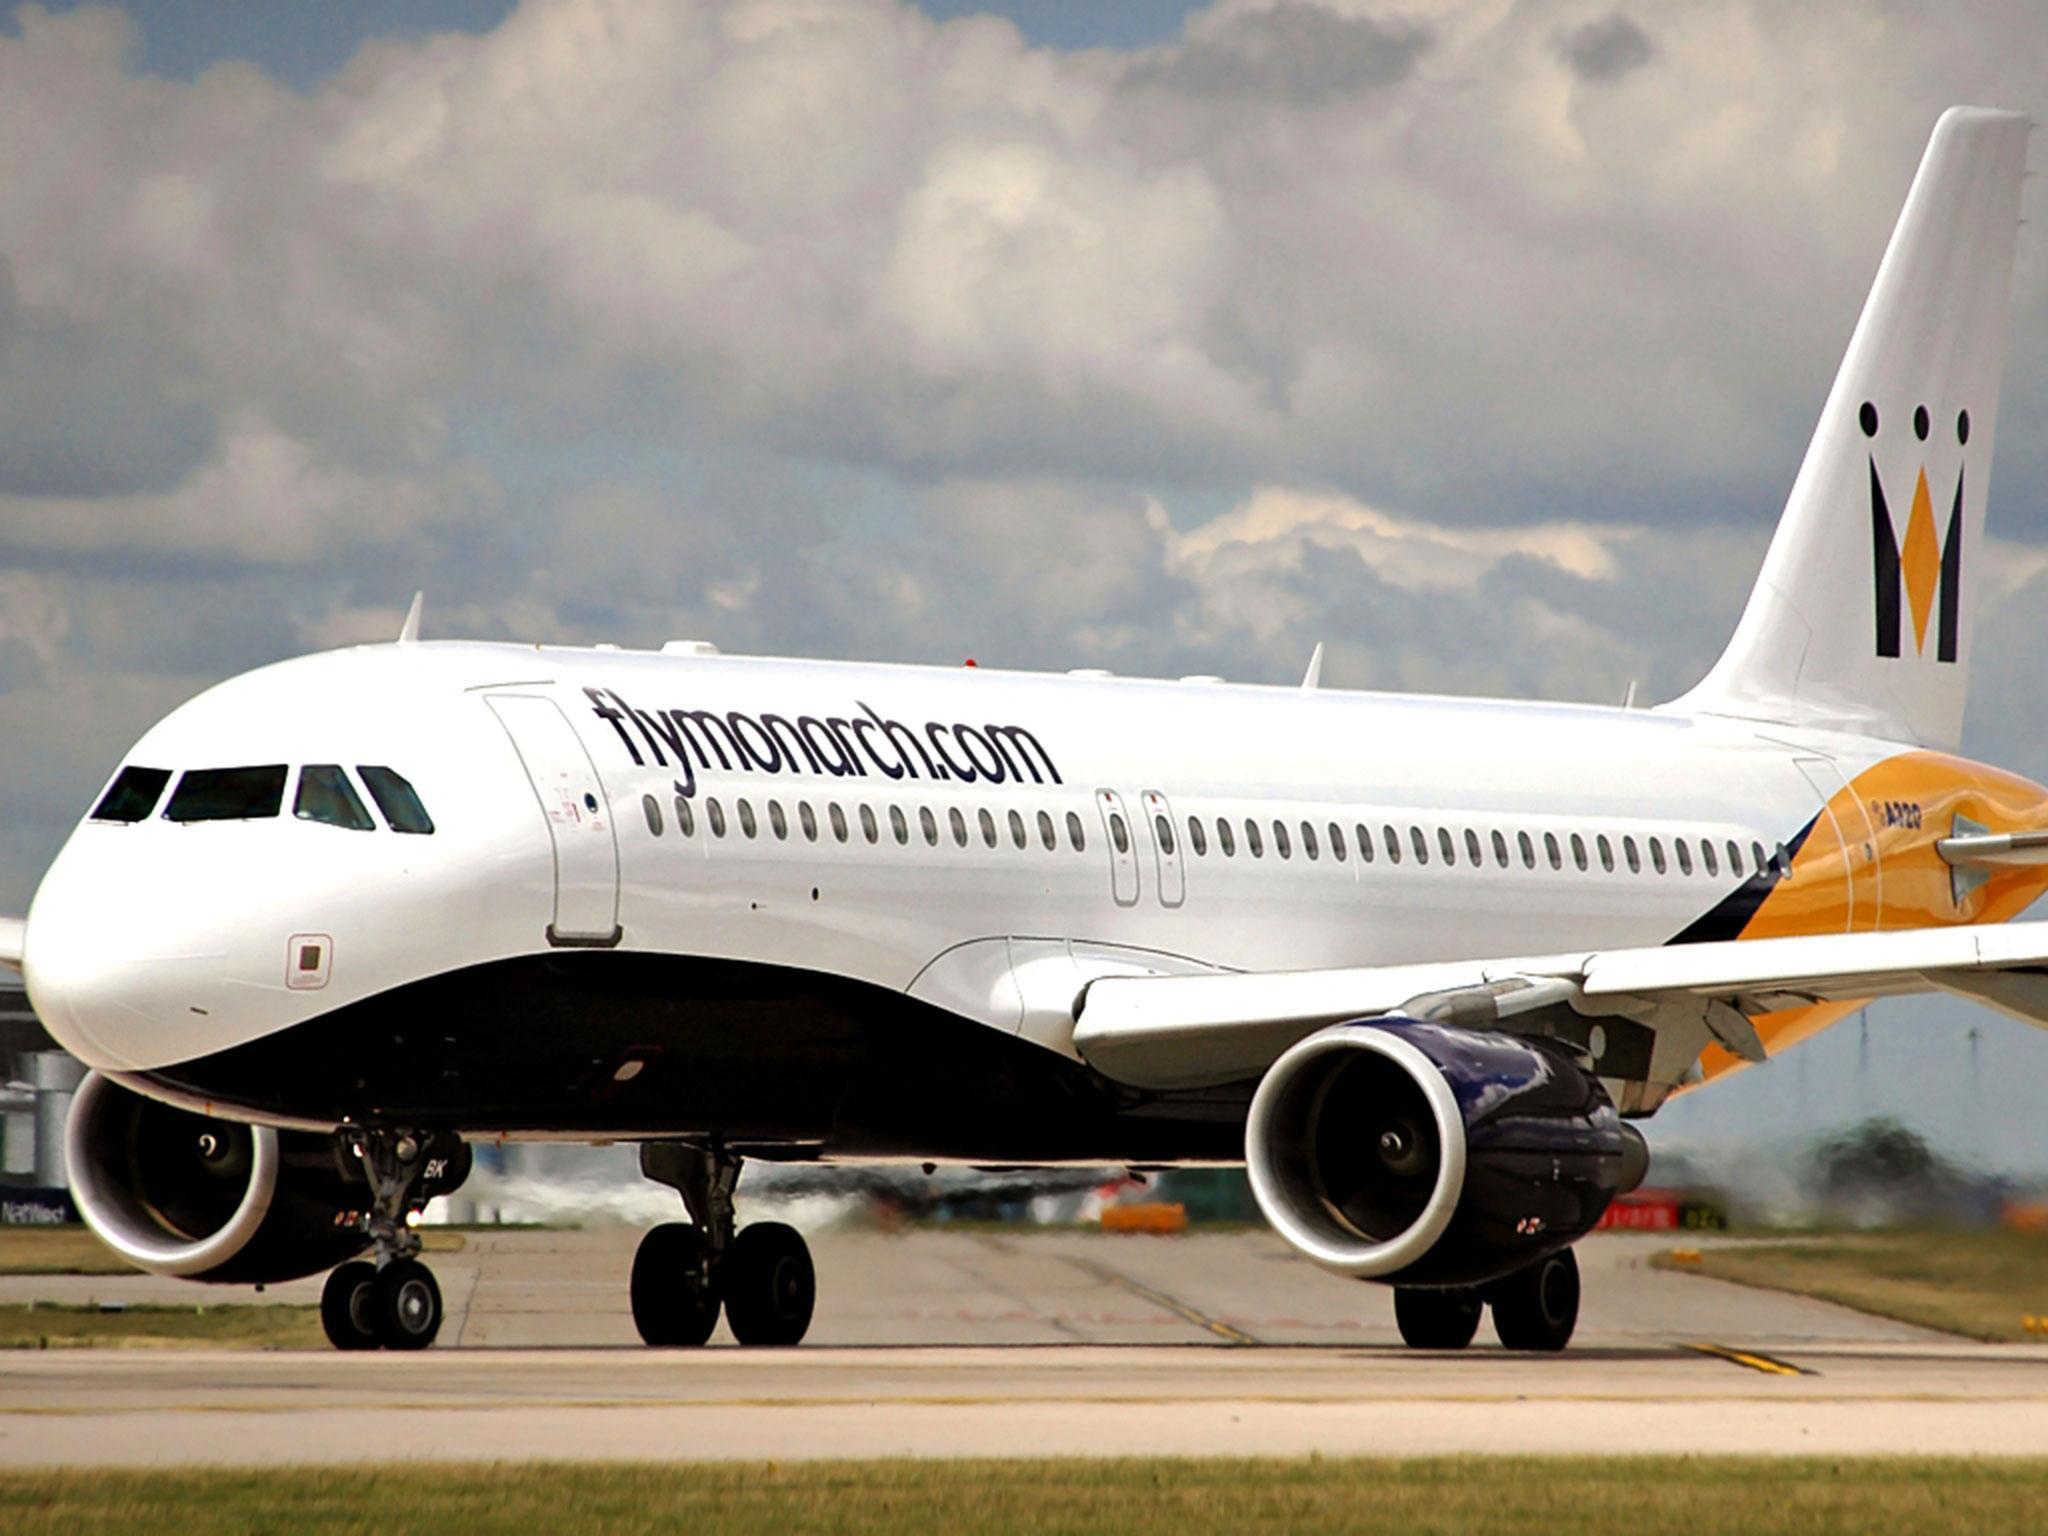 Monarch had been rumoured to be on the brink of collapse but has received investment